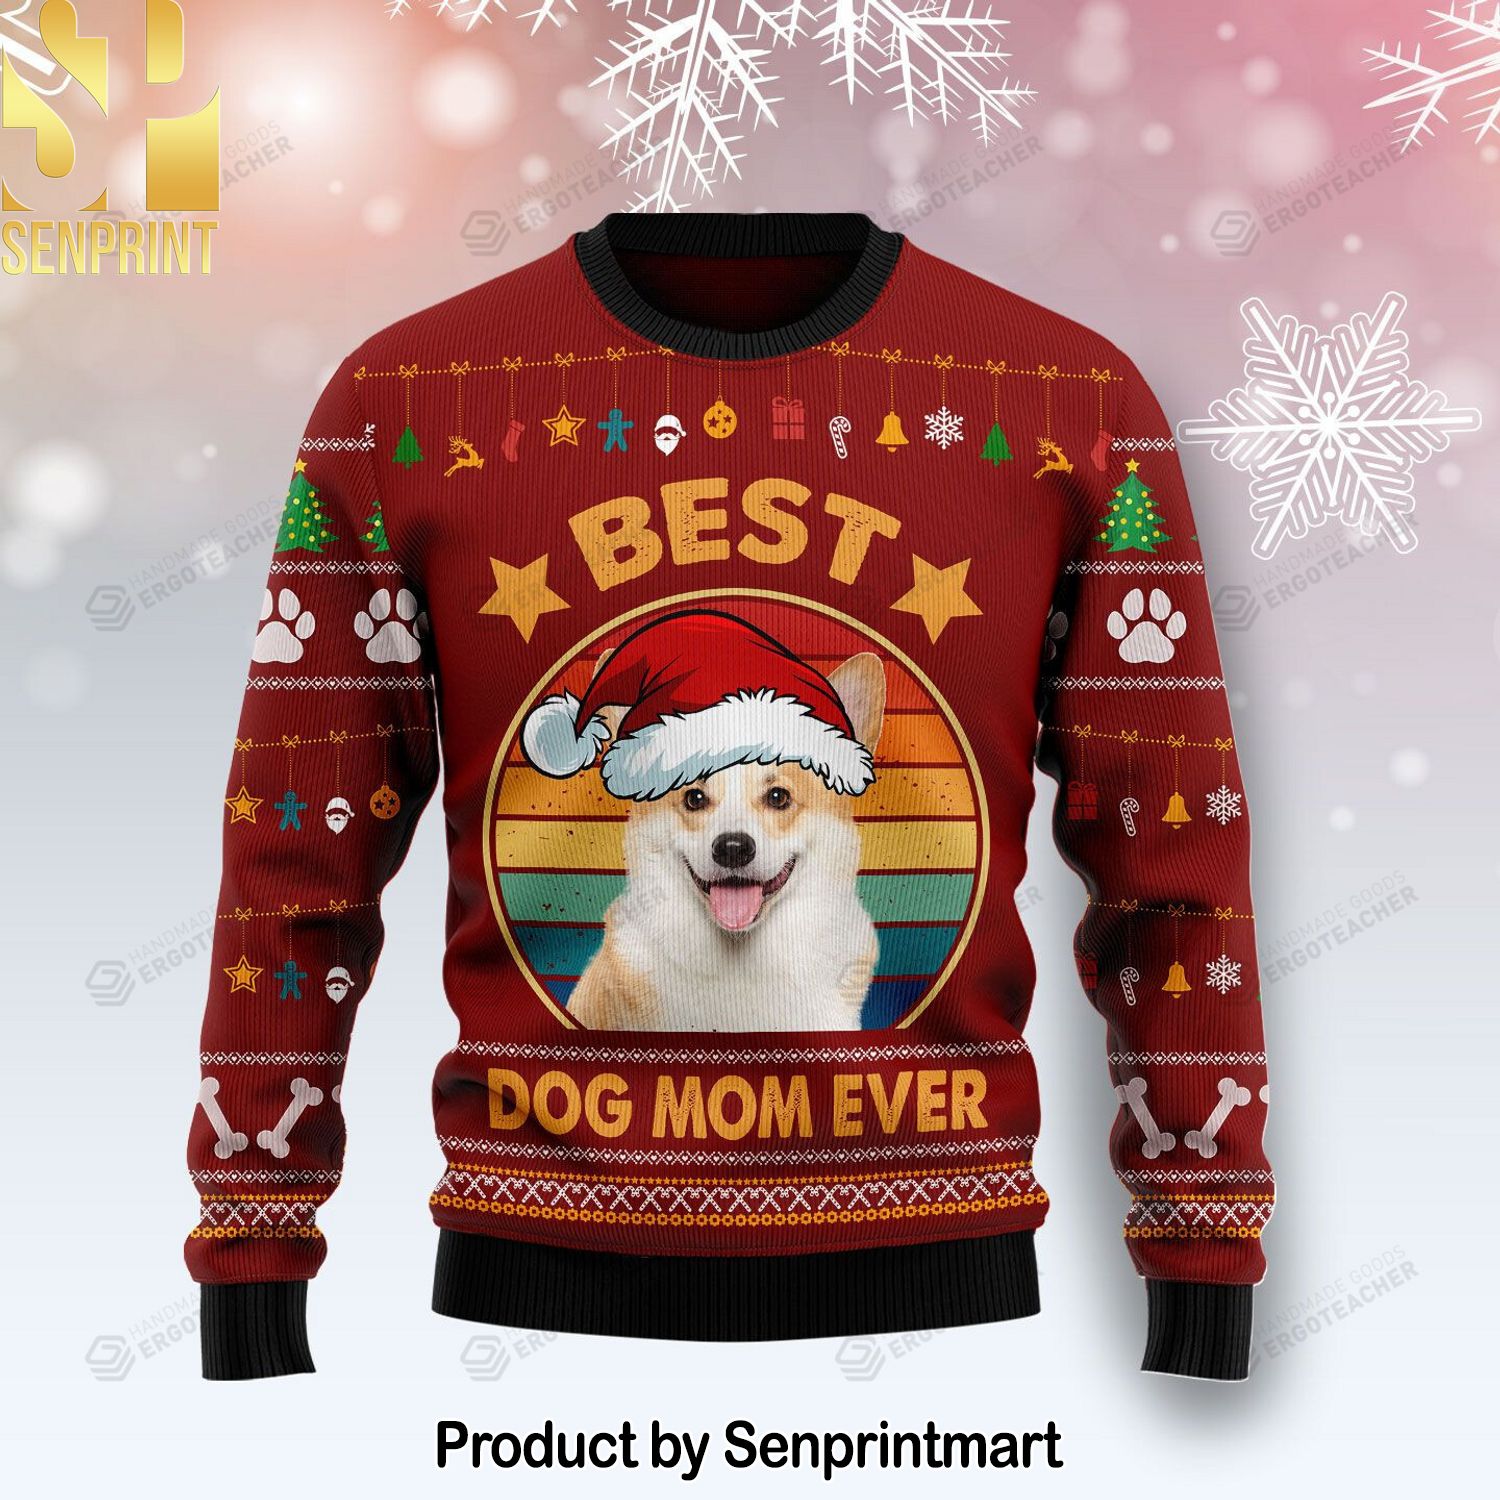 Cardigan Welsh Corgi Best Dog Mom Ever For Christmas Gifts Ugly Xmas Wool Knitted Sweater